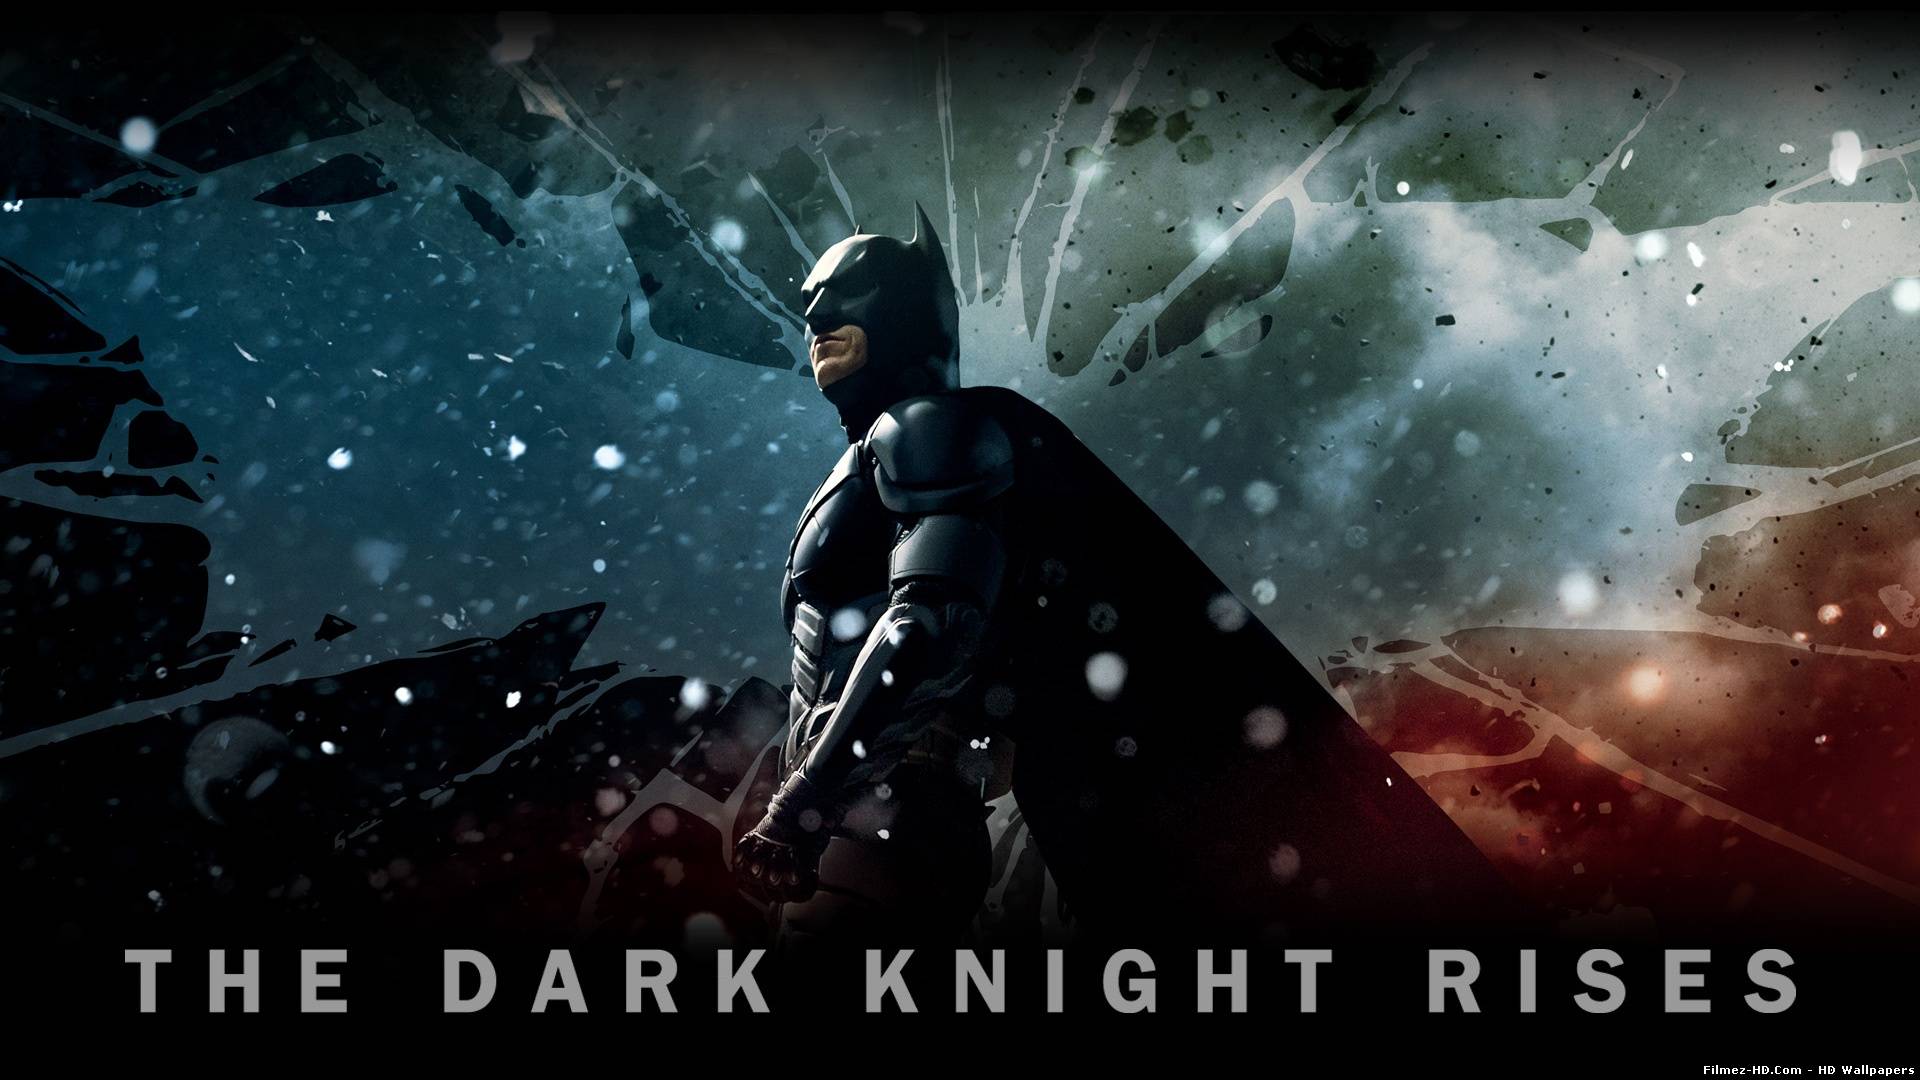 The Dark Knight Rises Official